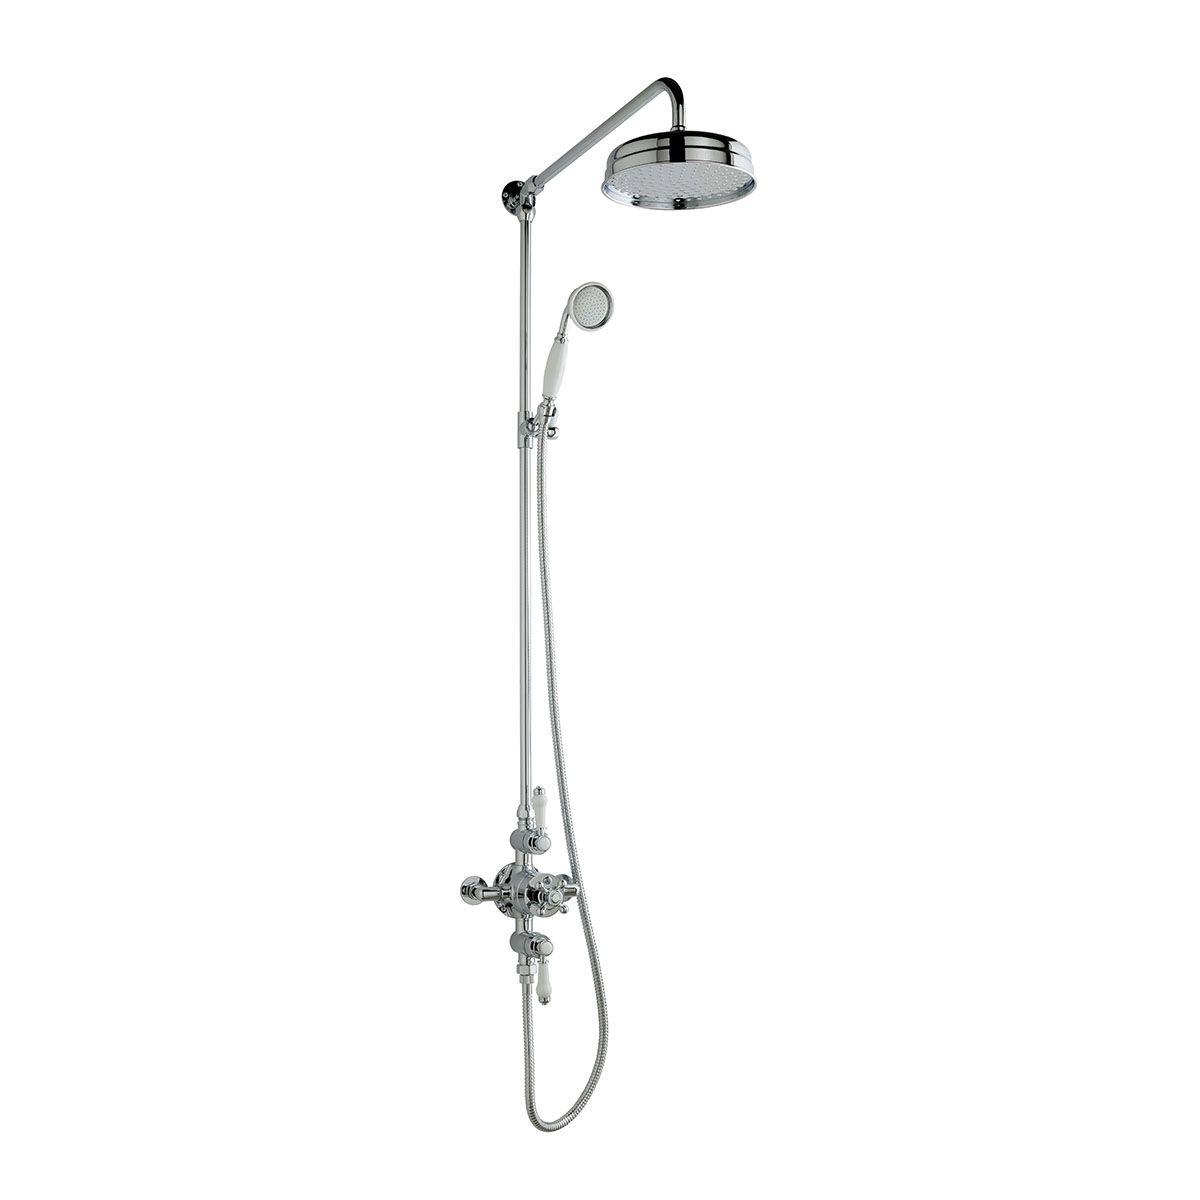 Traditional Thermostatic Exposed Dual Function Shower Valve System Chrome